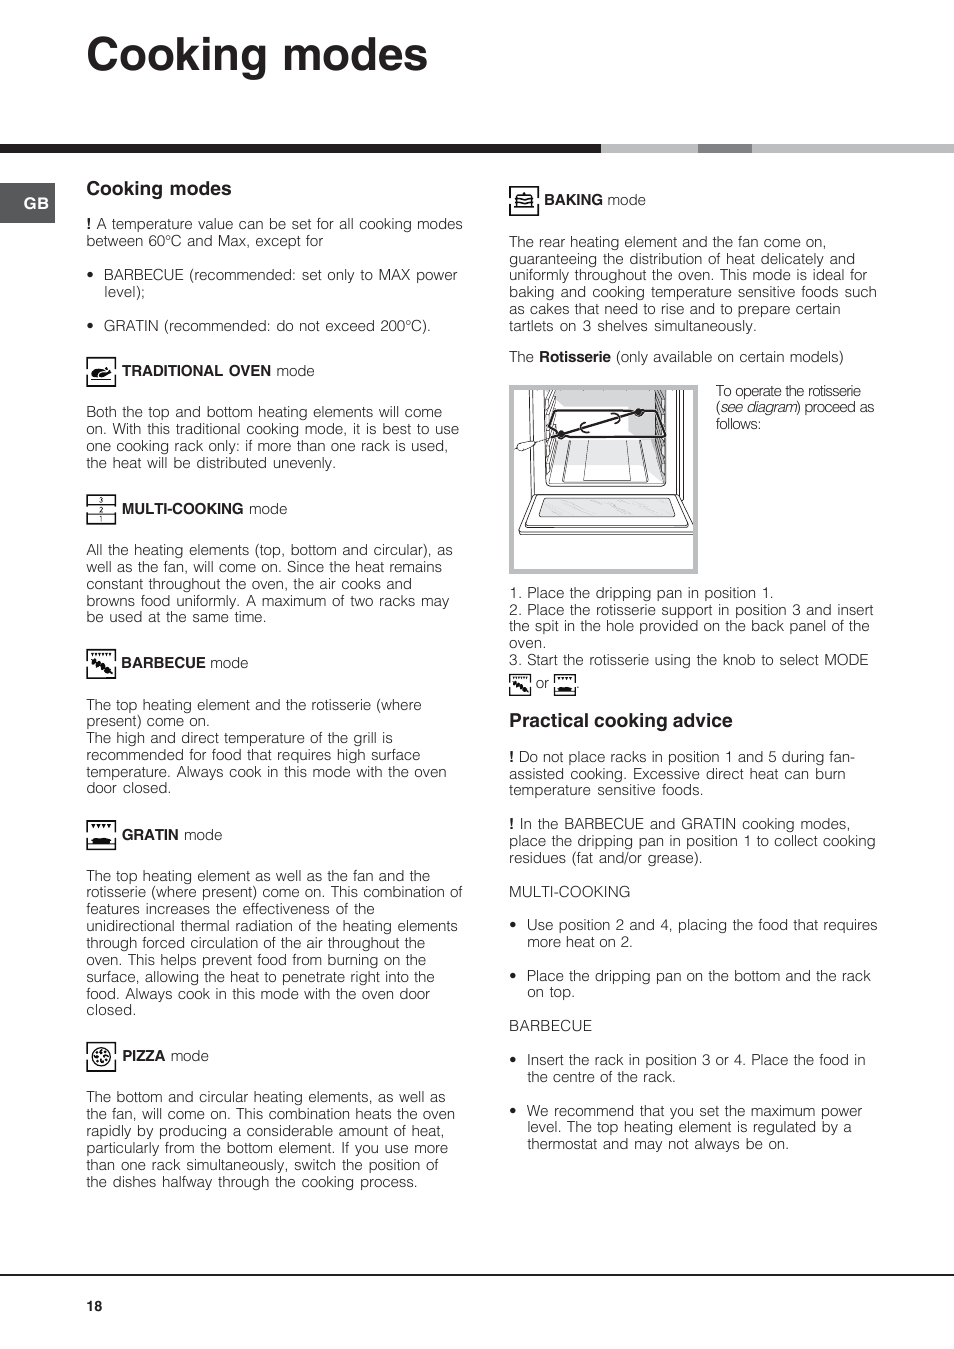 Cooking modes, Practical cooking advice | Hotpoint Ariston Diamond FD 61.1  (SL)-HA User Manual | Page 18 / 72